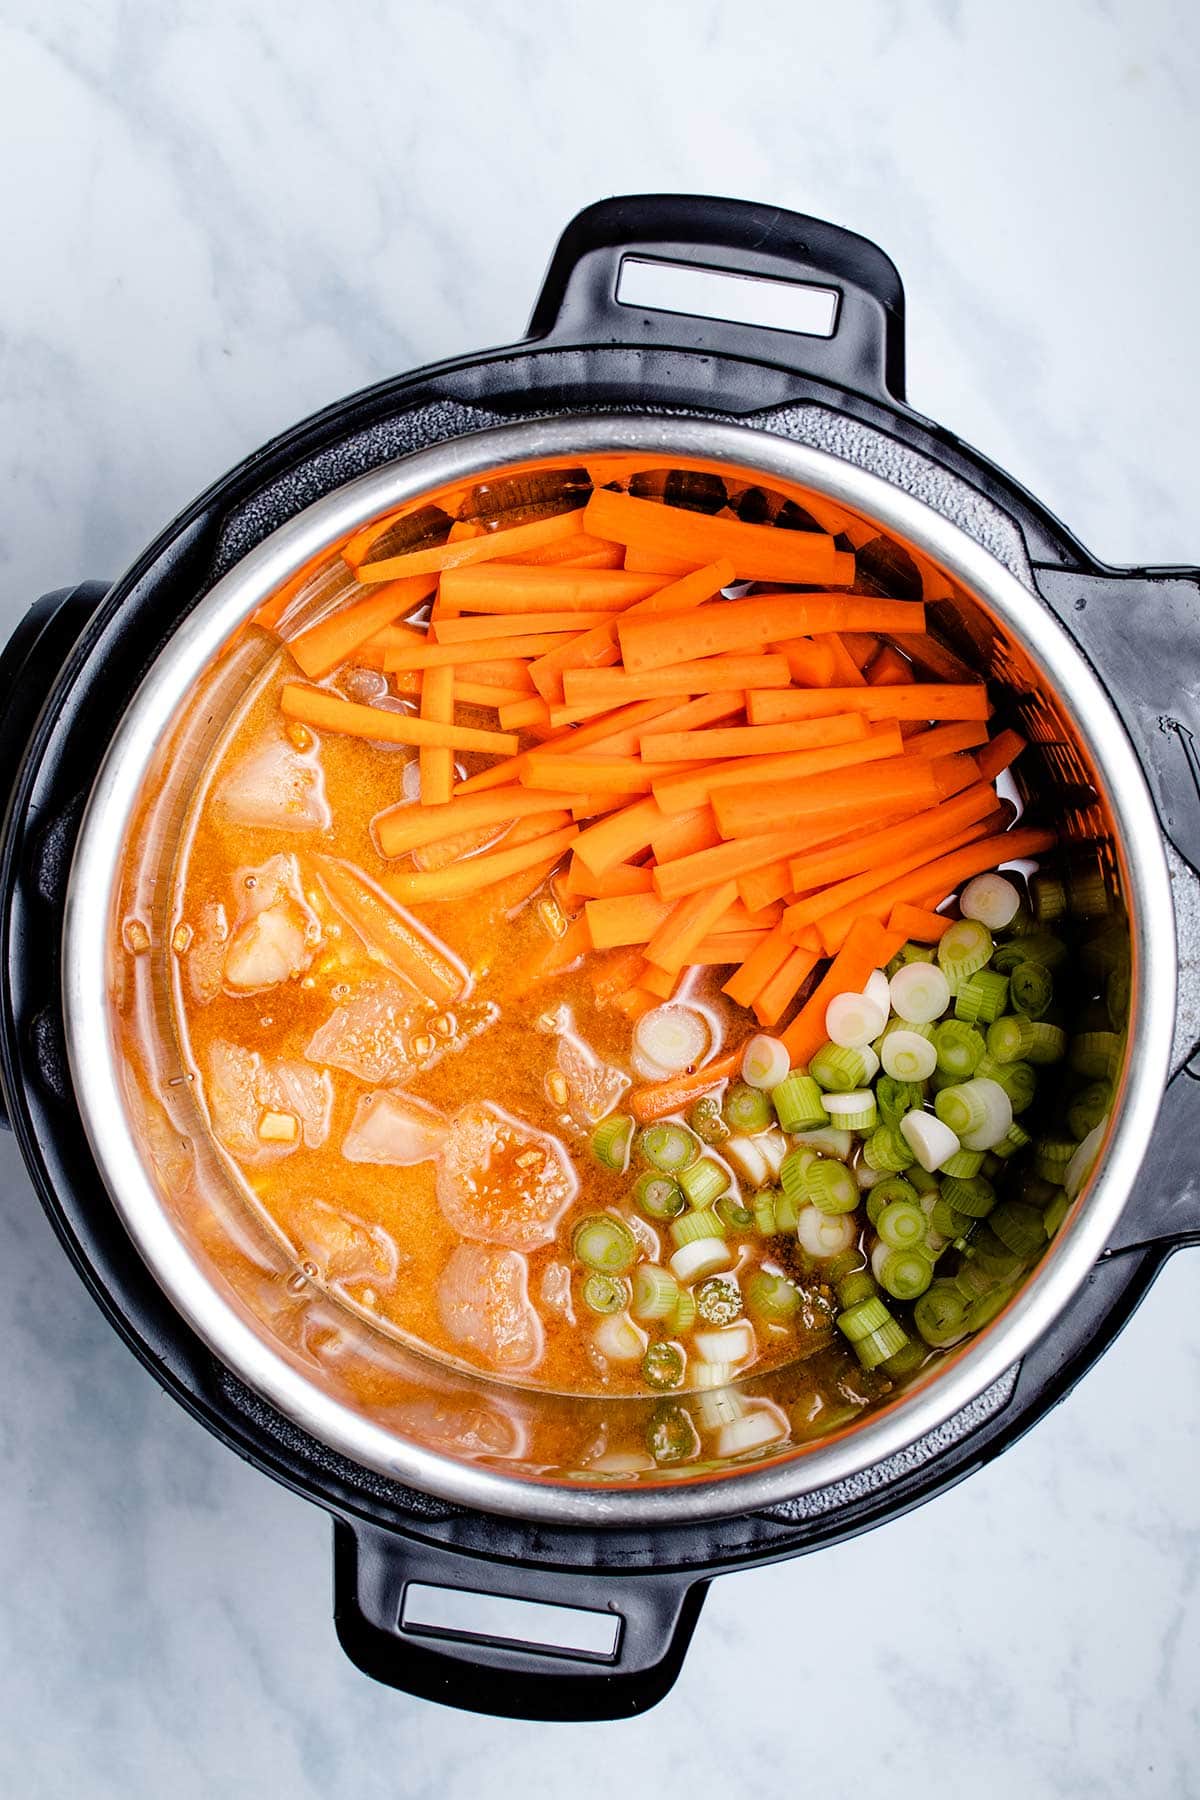 Diced chicken breast, homemade pad Thai sauce, sliced green onion and matchstick carrots in an Instant Pot viewed from overhead